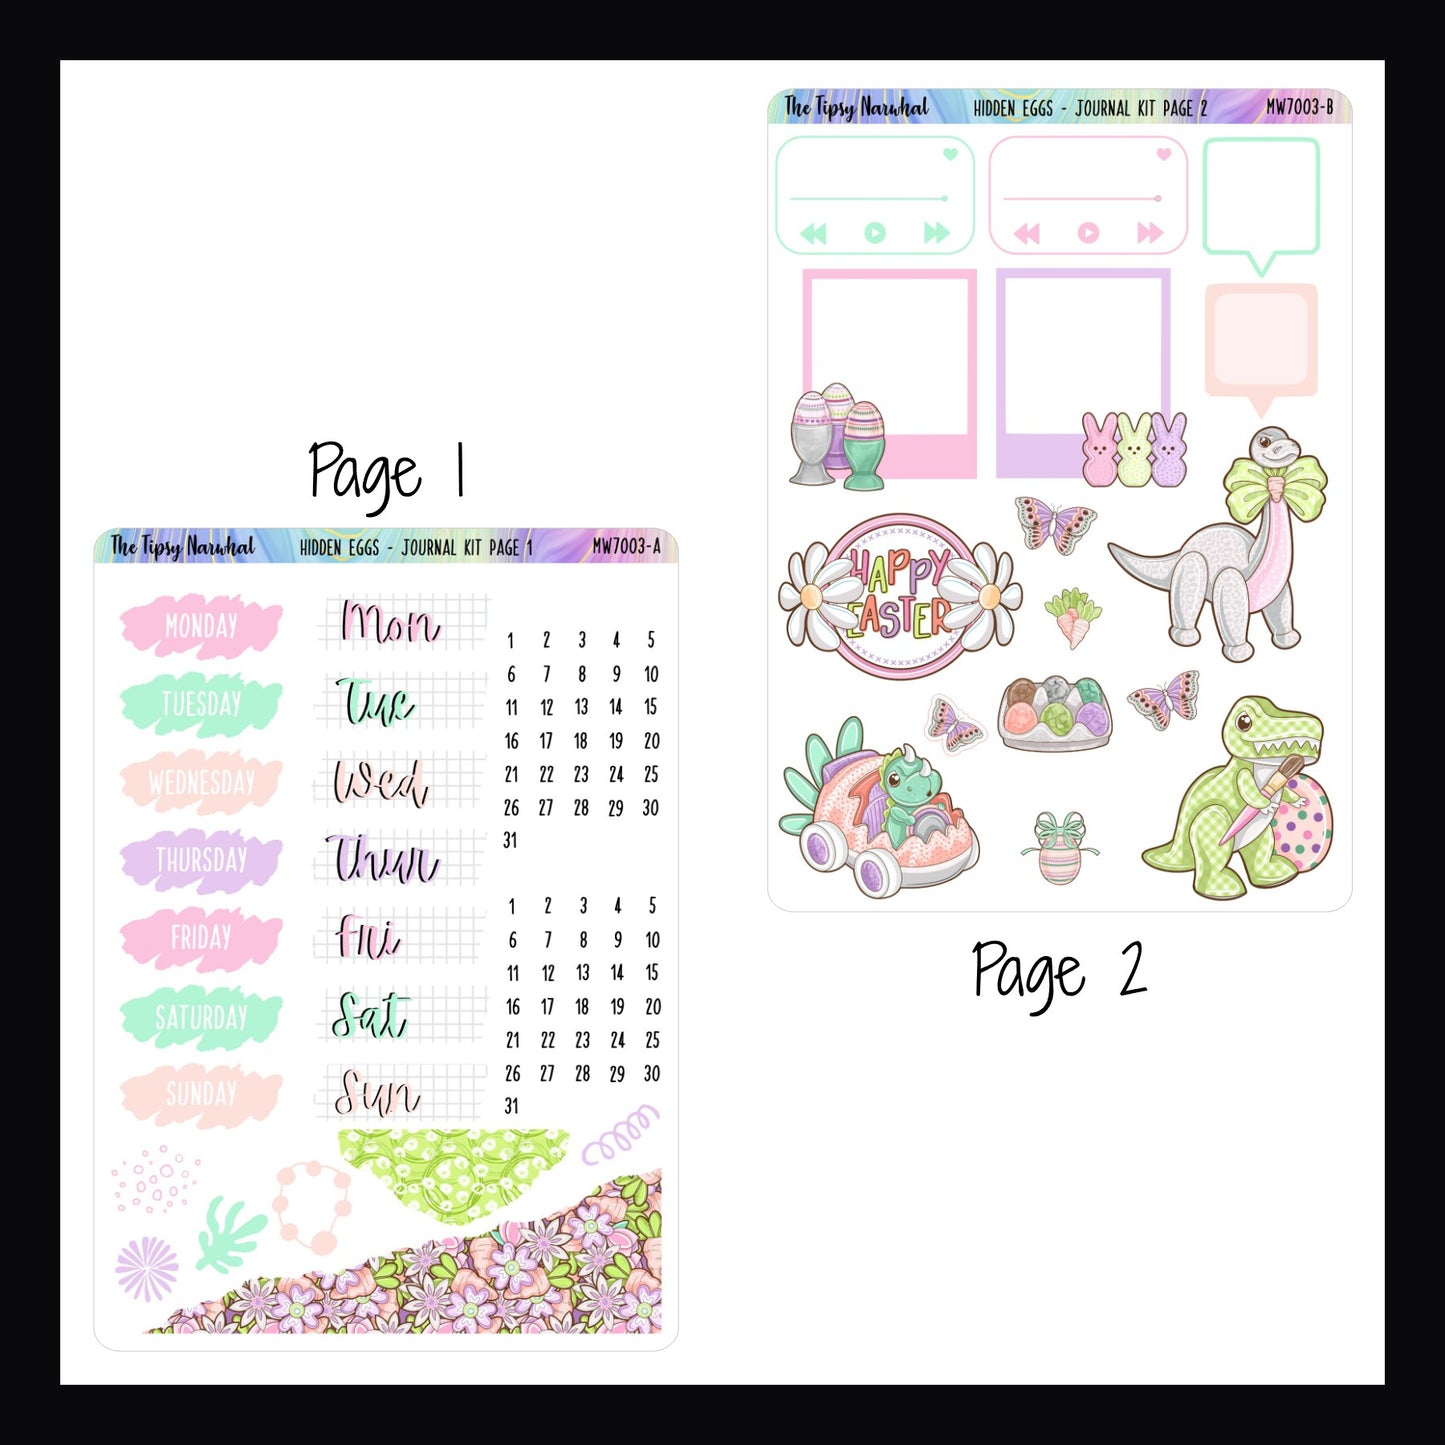 Digital Hidden Eggs Journal Kit Pages 1 and 2. Page 1 features date covers, ripped appearance stickers and doodle stickers.  Page 2 features various Dino decor stickers, playlist stickers, two photo frame stickers and speech box stickers.